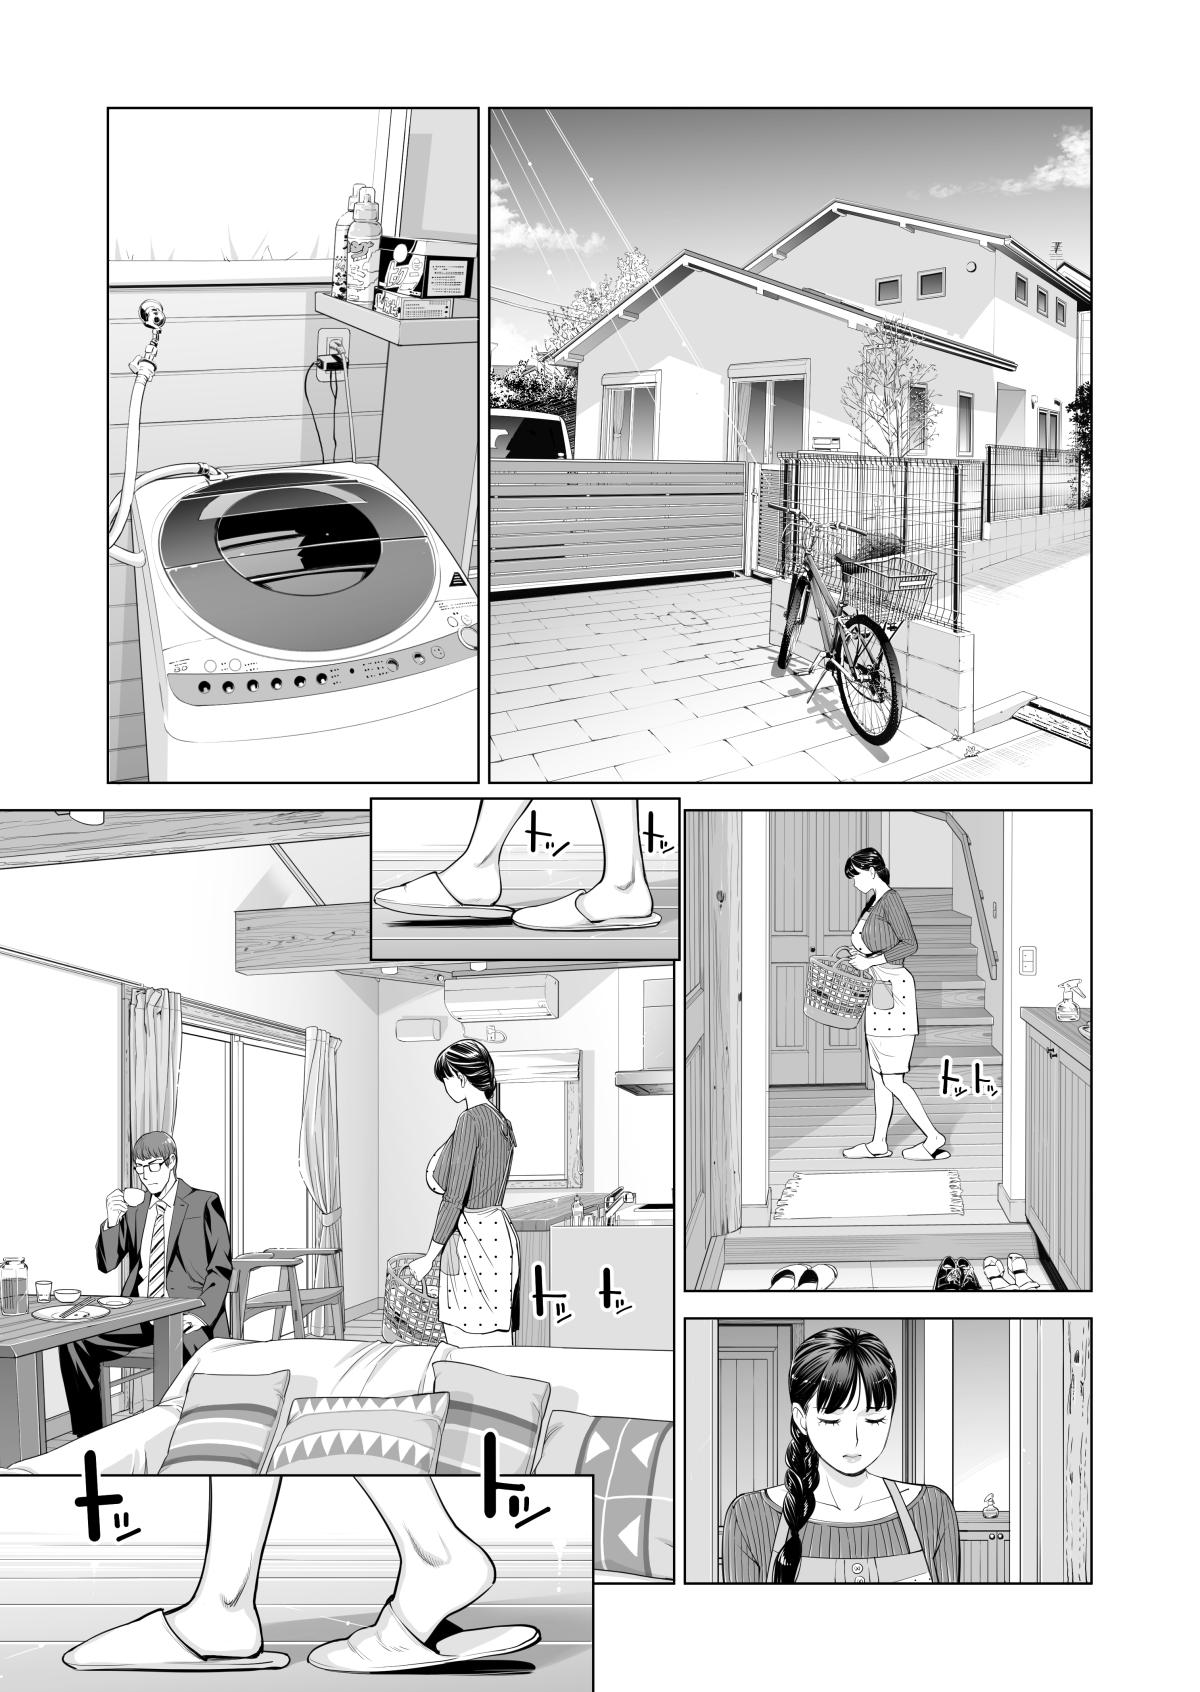 [HGT Lab (Tsusauto)] Tsukiyo no Midare Zake (Kouhen) Moonlit Intoxication ~ A Housewife Stolen by a Coworker Besides her Blackout Drunk Husband ~ Chapter 2 [English] 3